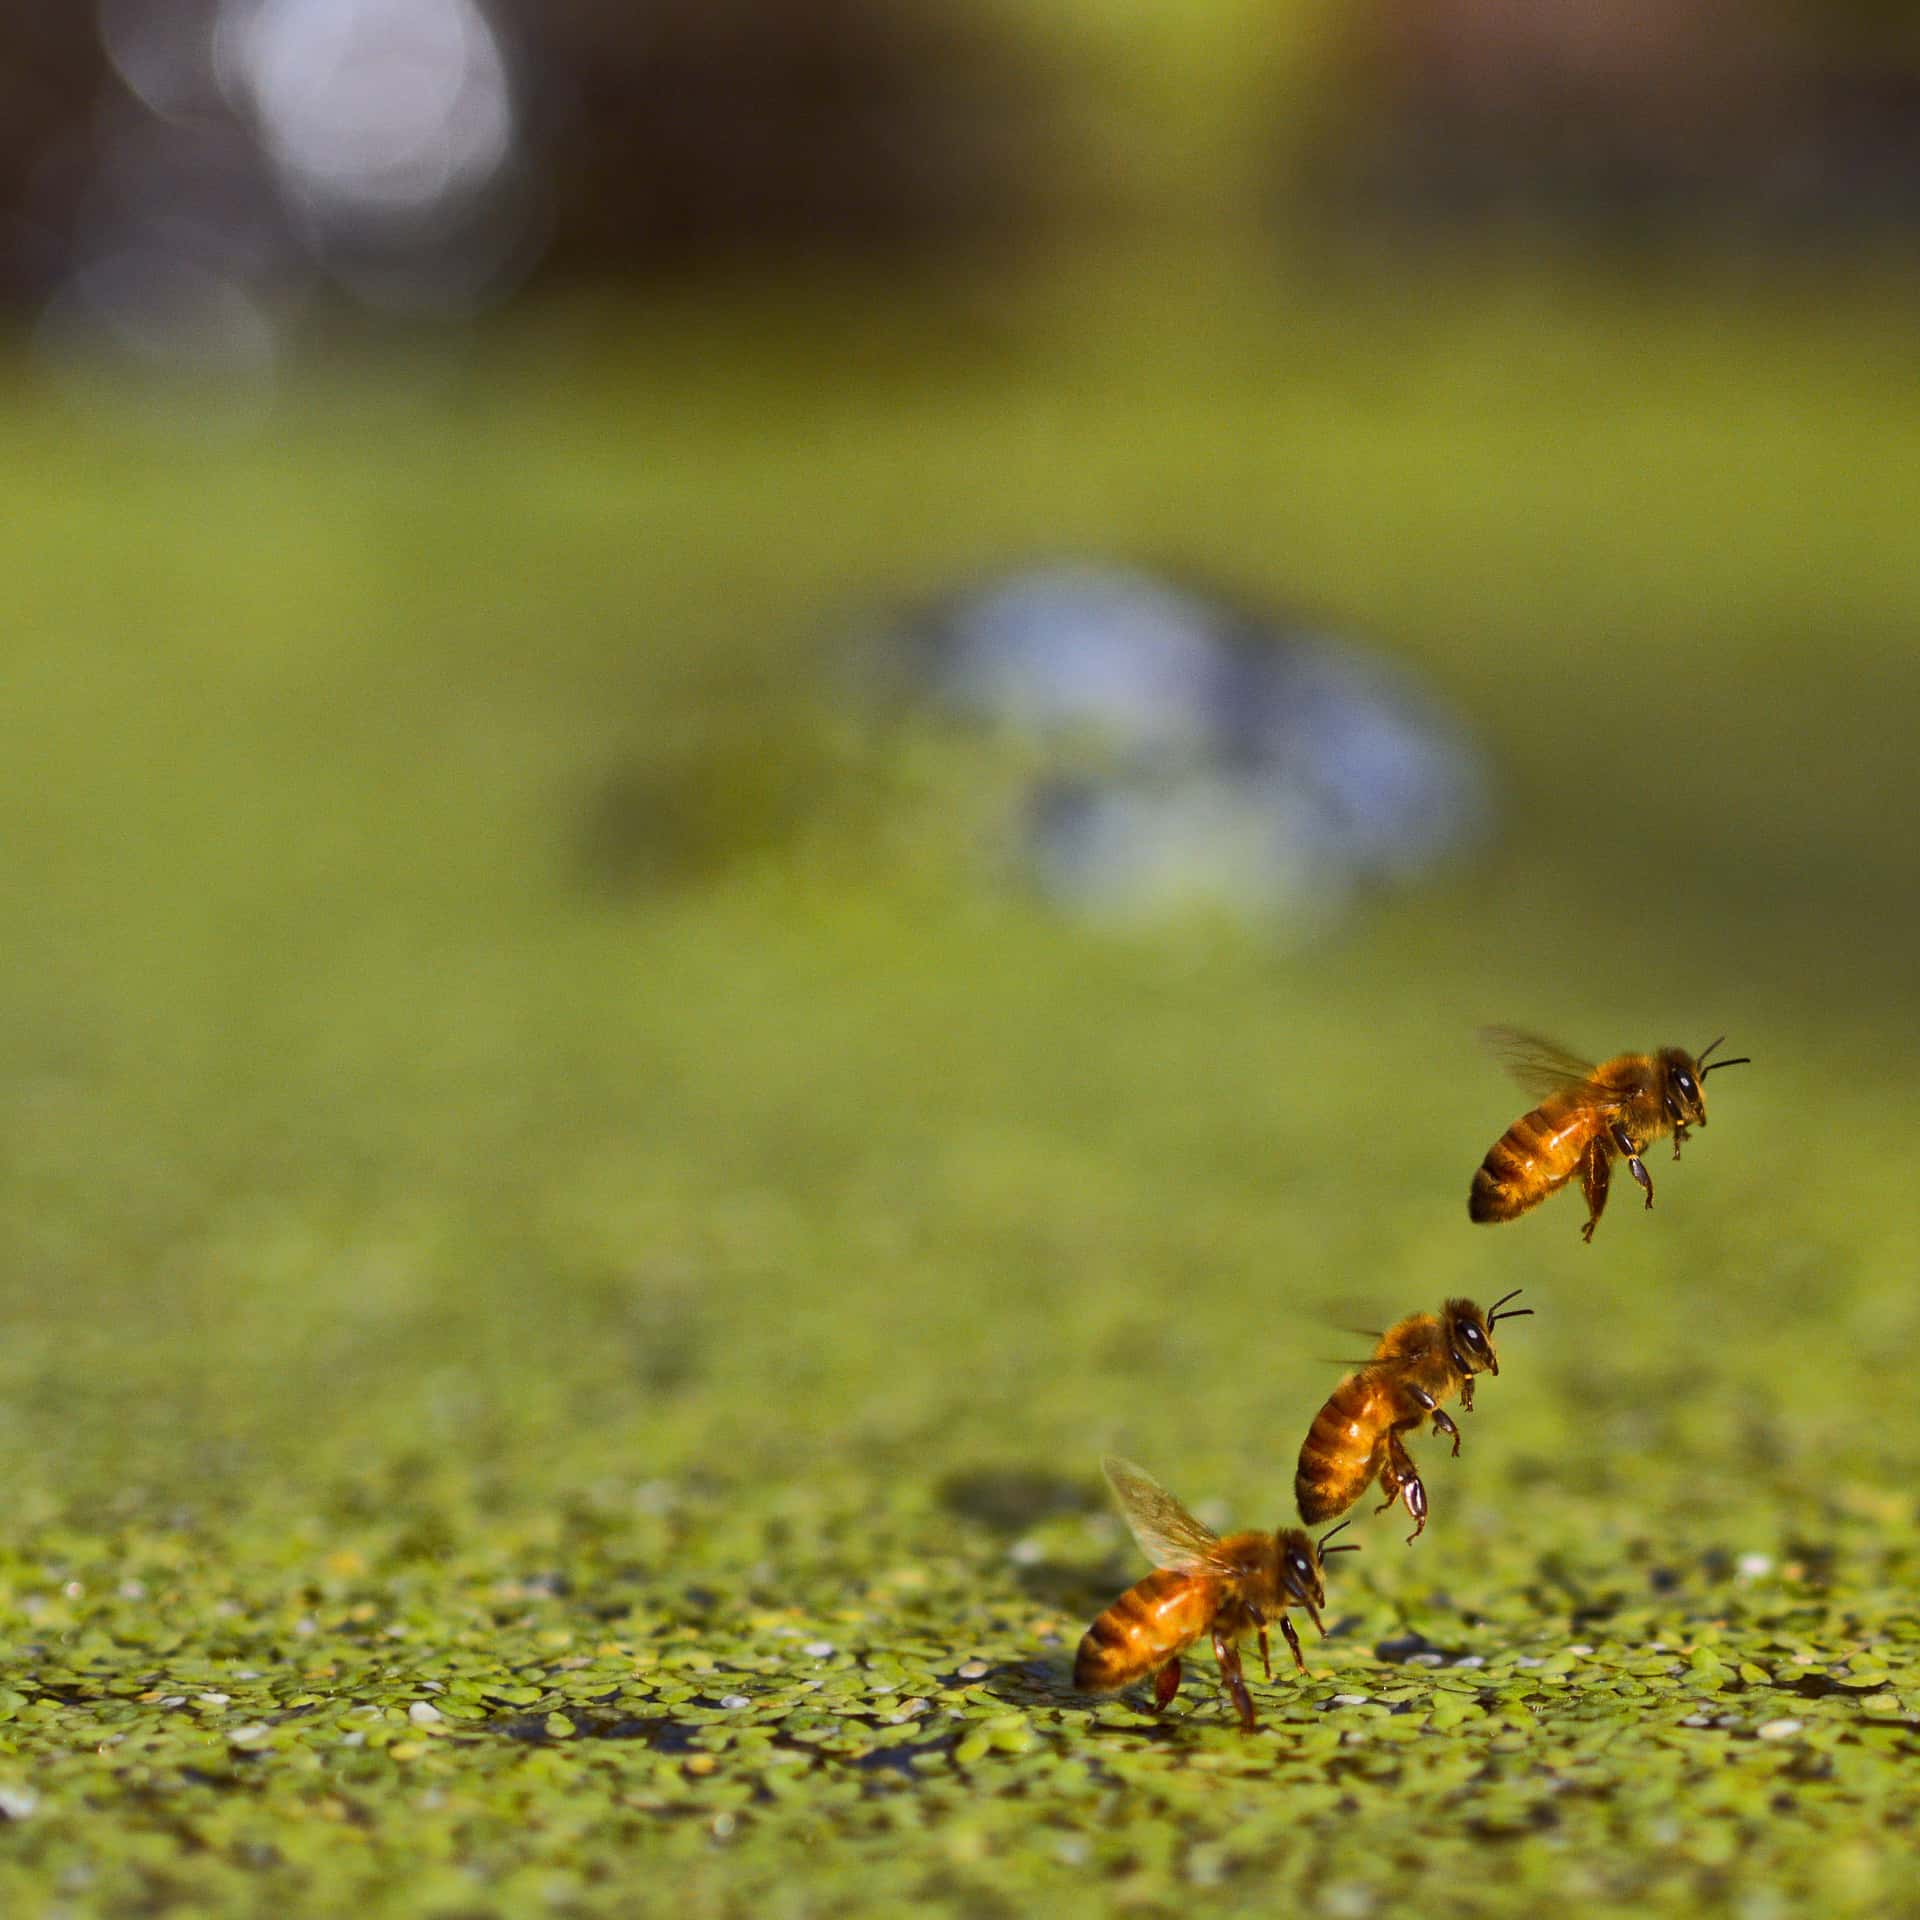 temporal composite of a honey bee taking off from duckweed